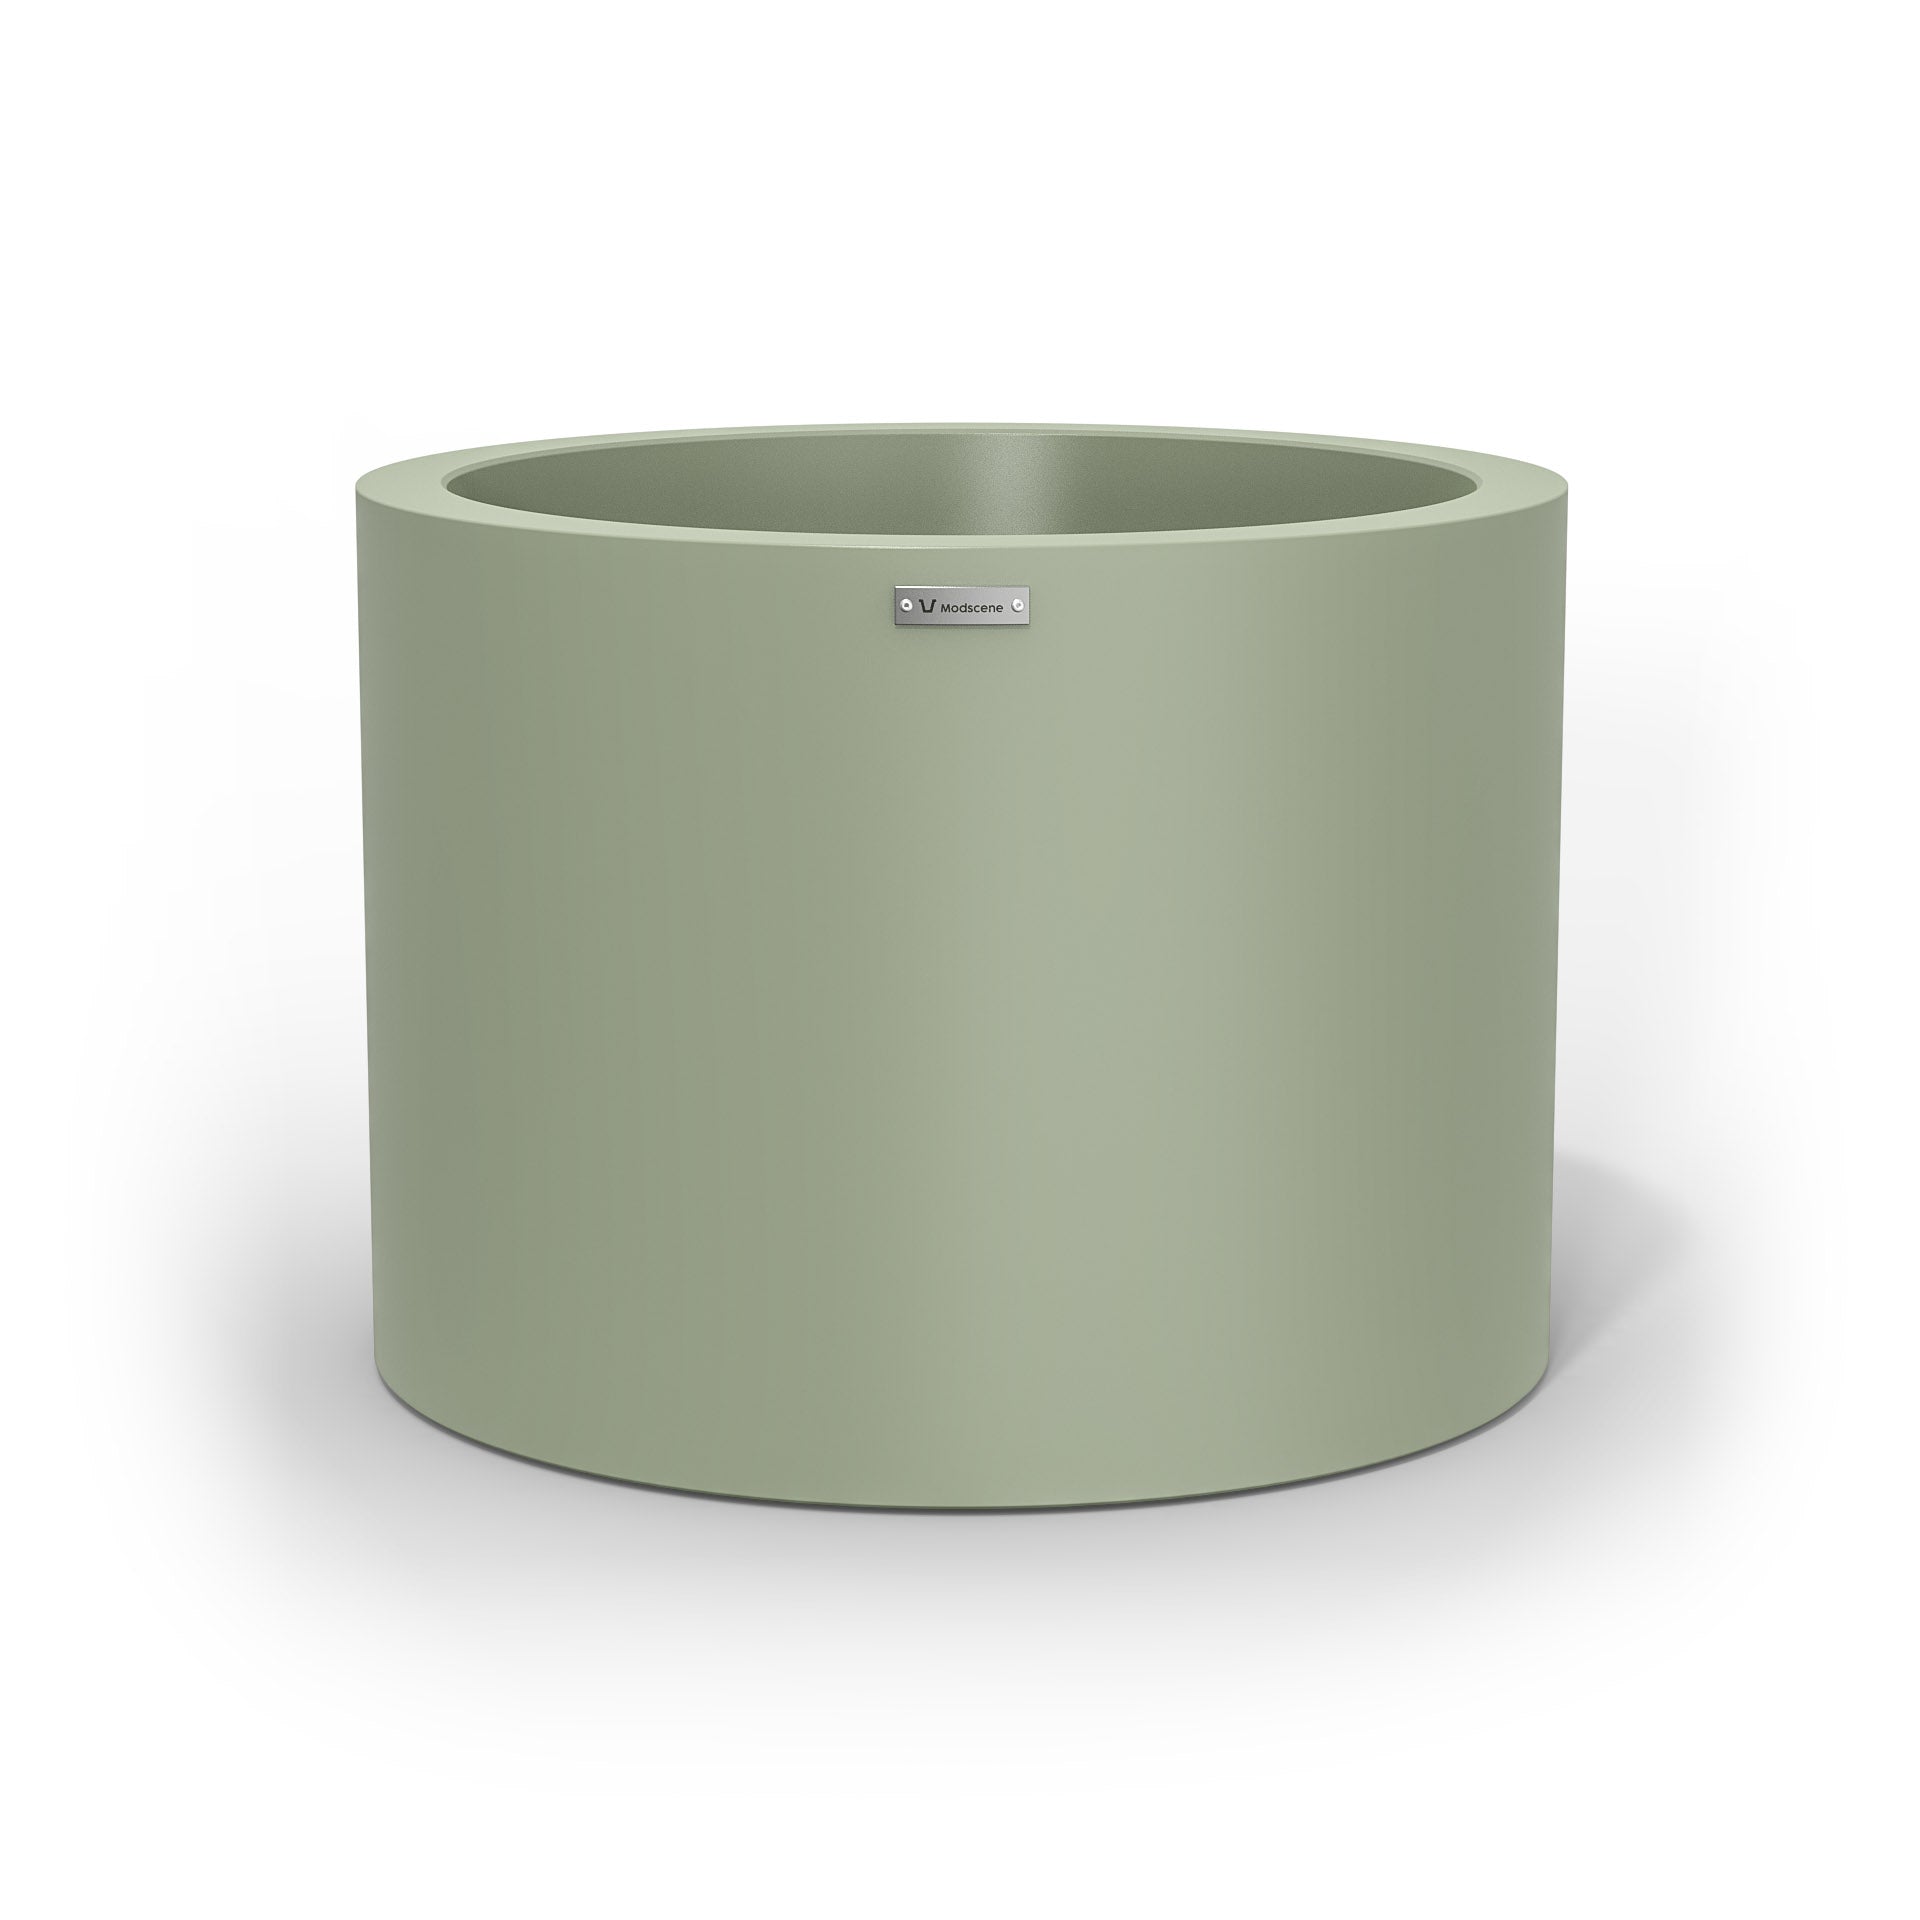 A cylinder shaped pot planter in pastel green made by Modscene NZ. 